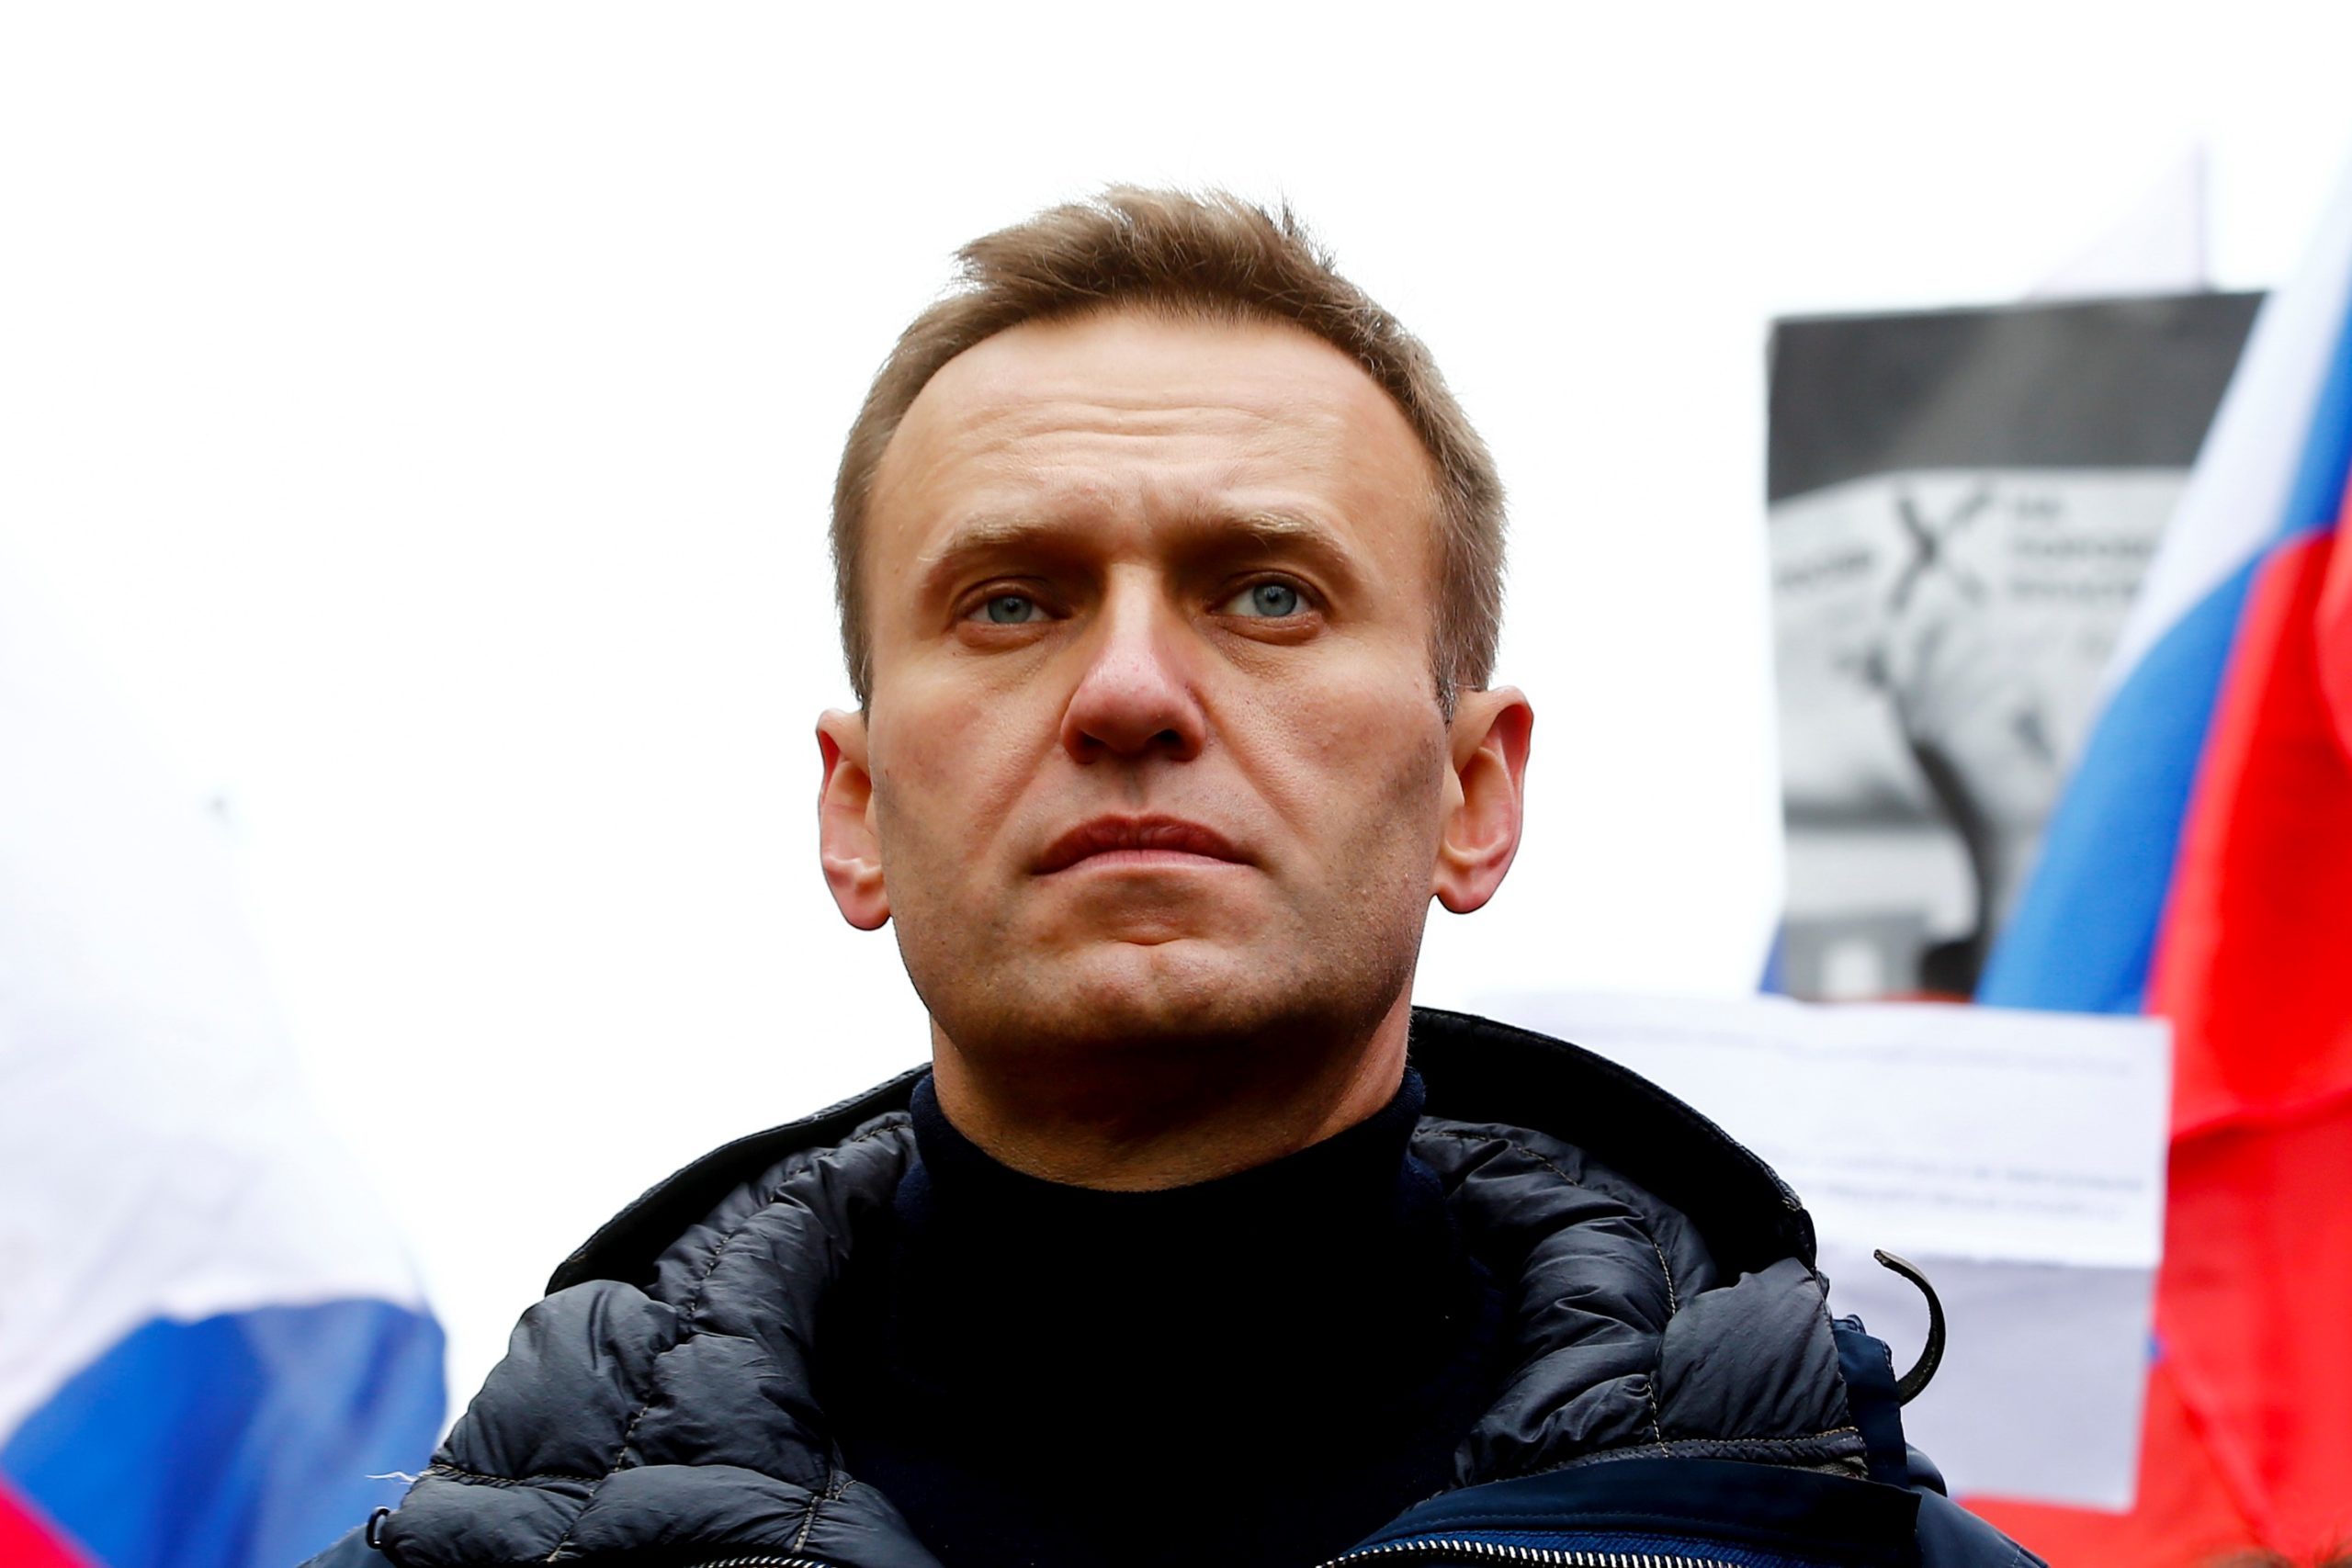 Pro-Kremlin social media teeming with theories about Alexei Navalny’s suspected poisoning